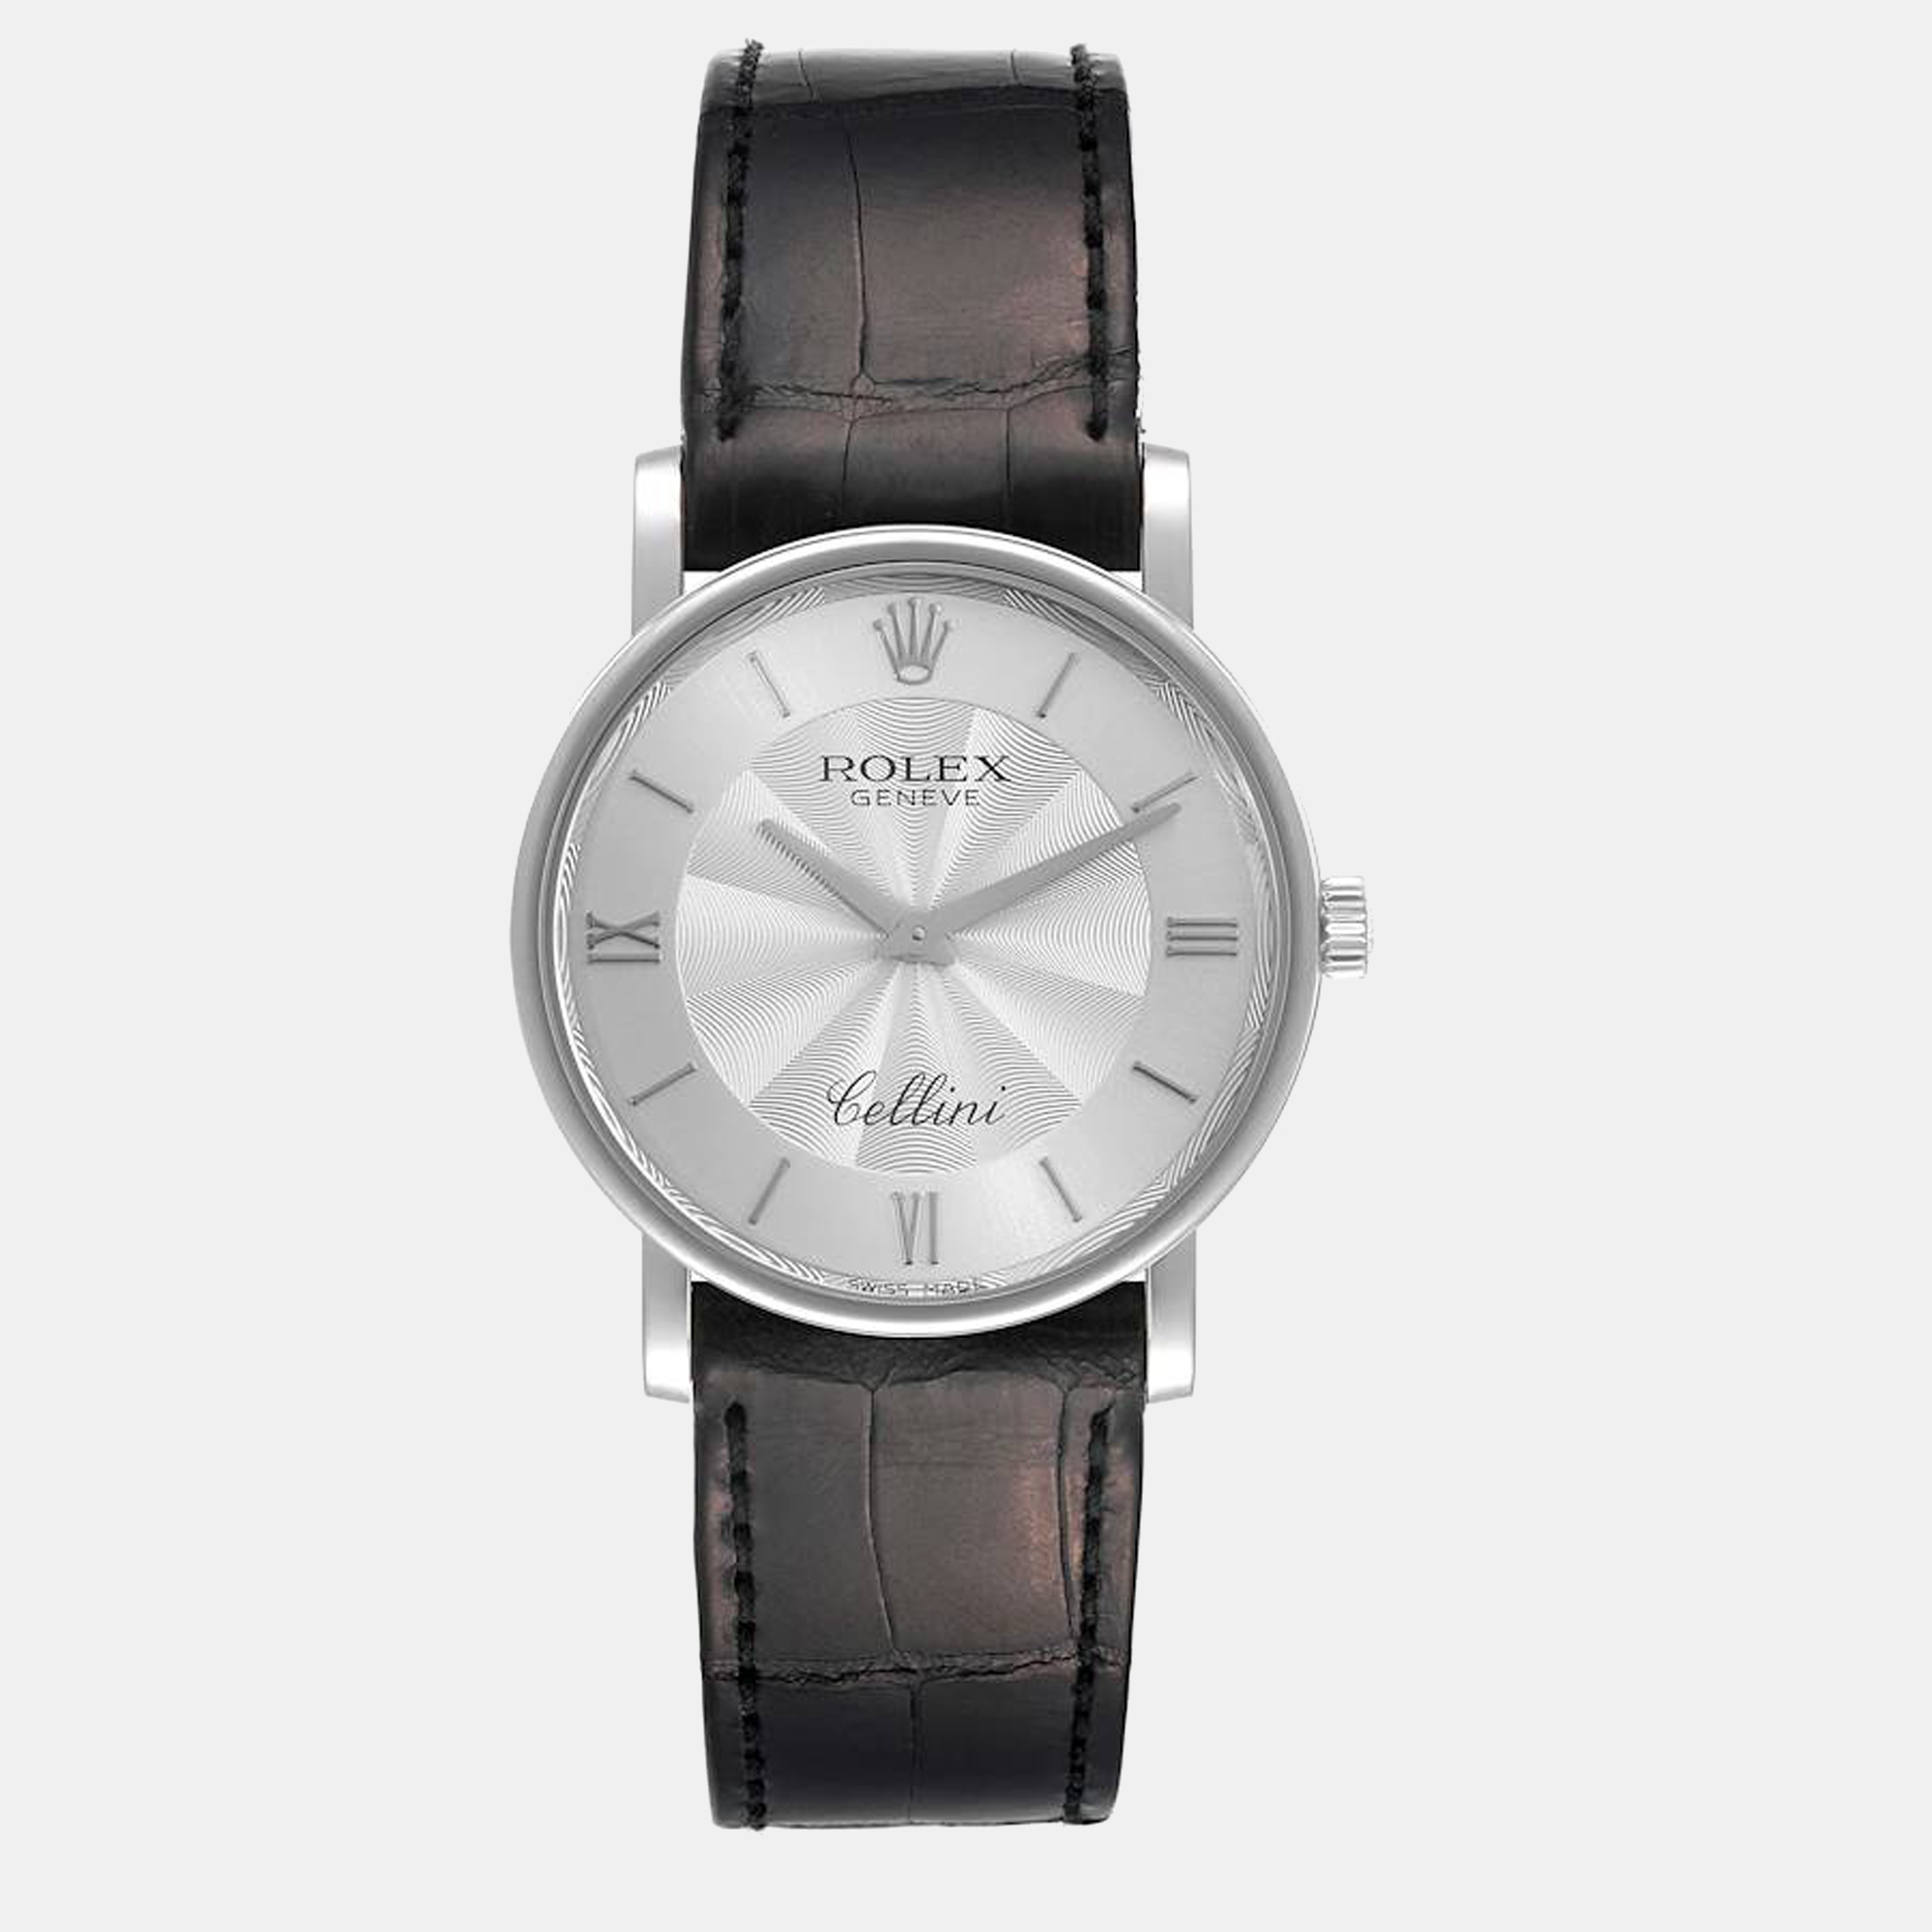 Rolex cellini classic white gold decorated silver dial mens watch 5115